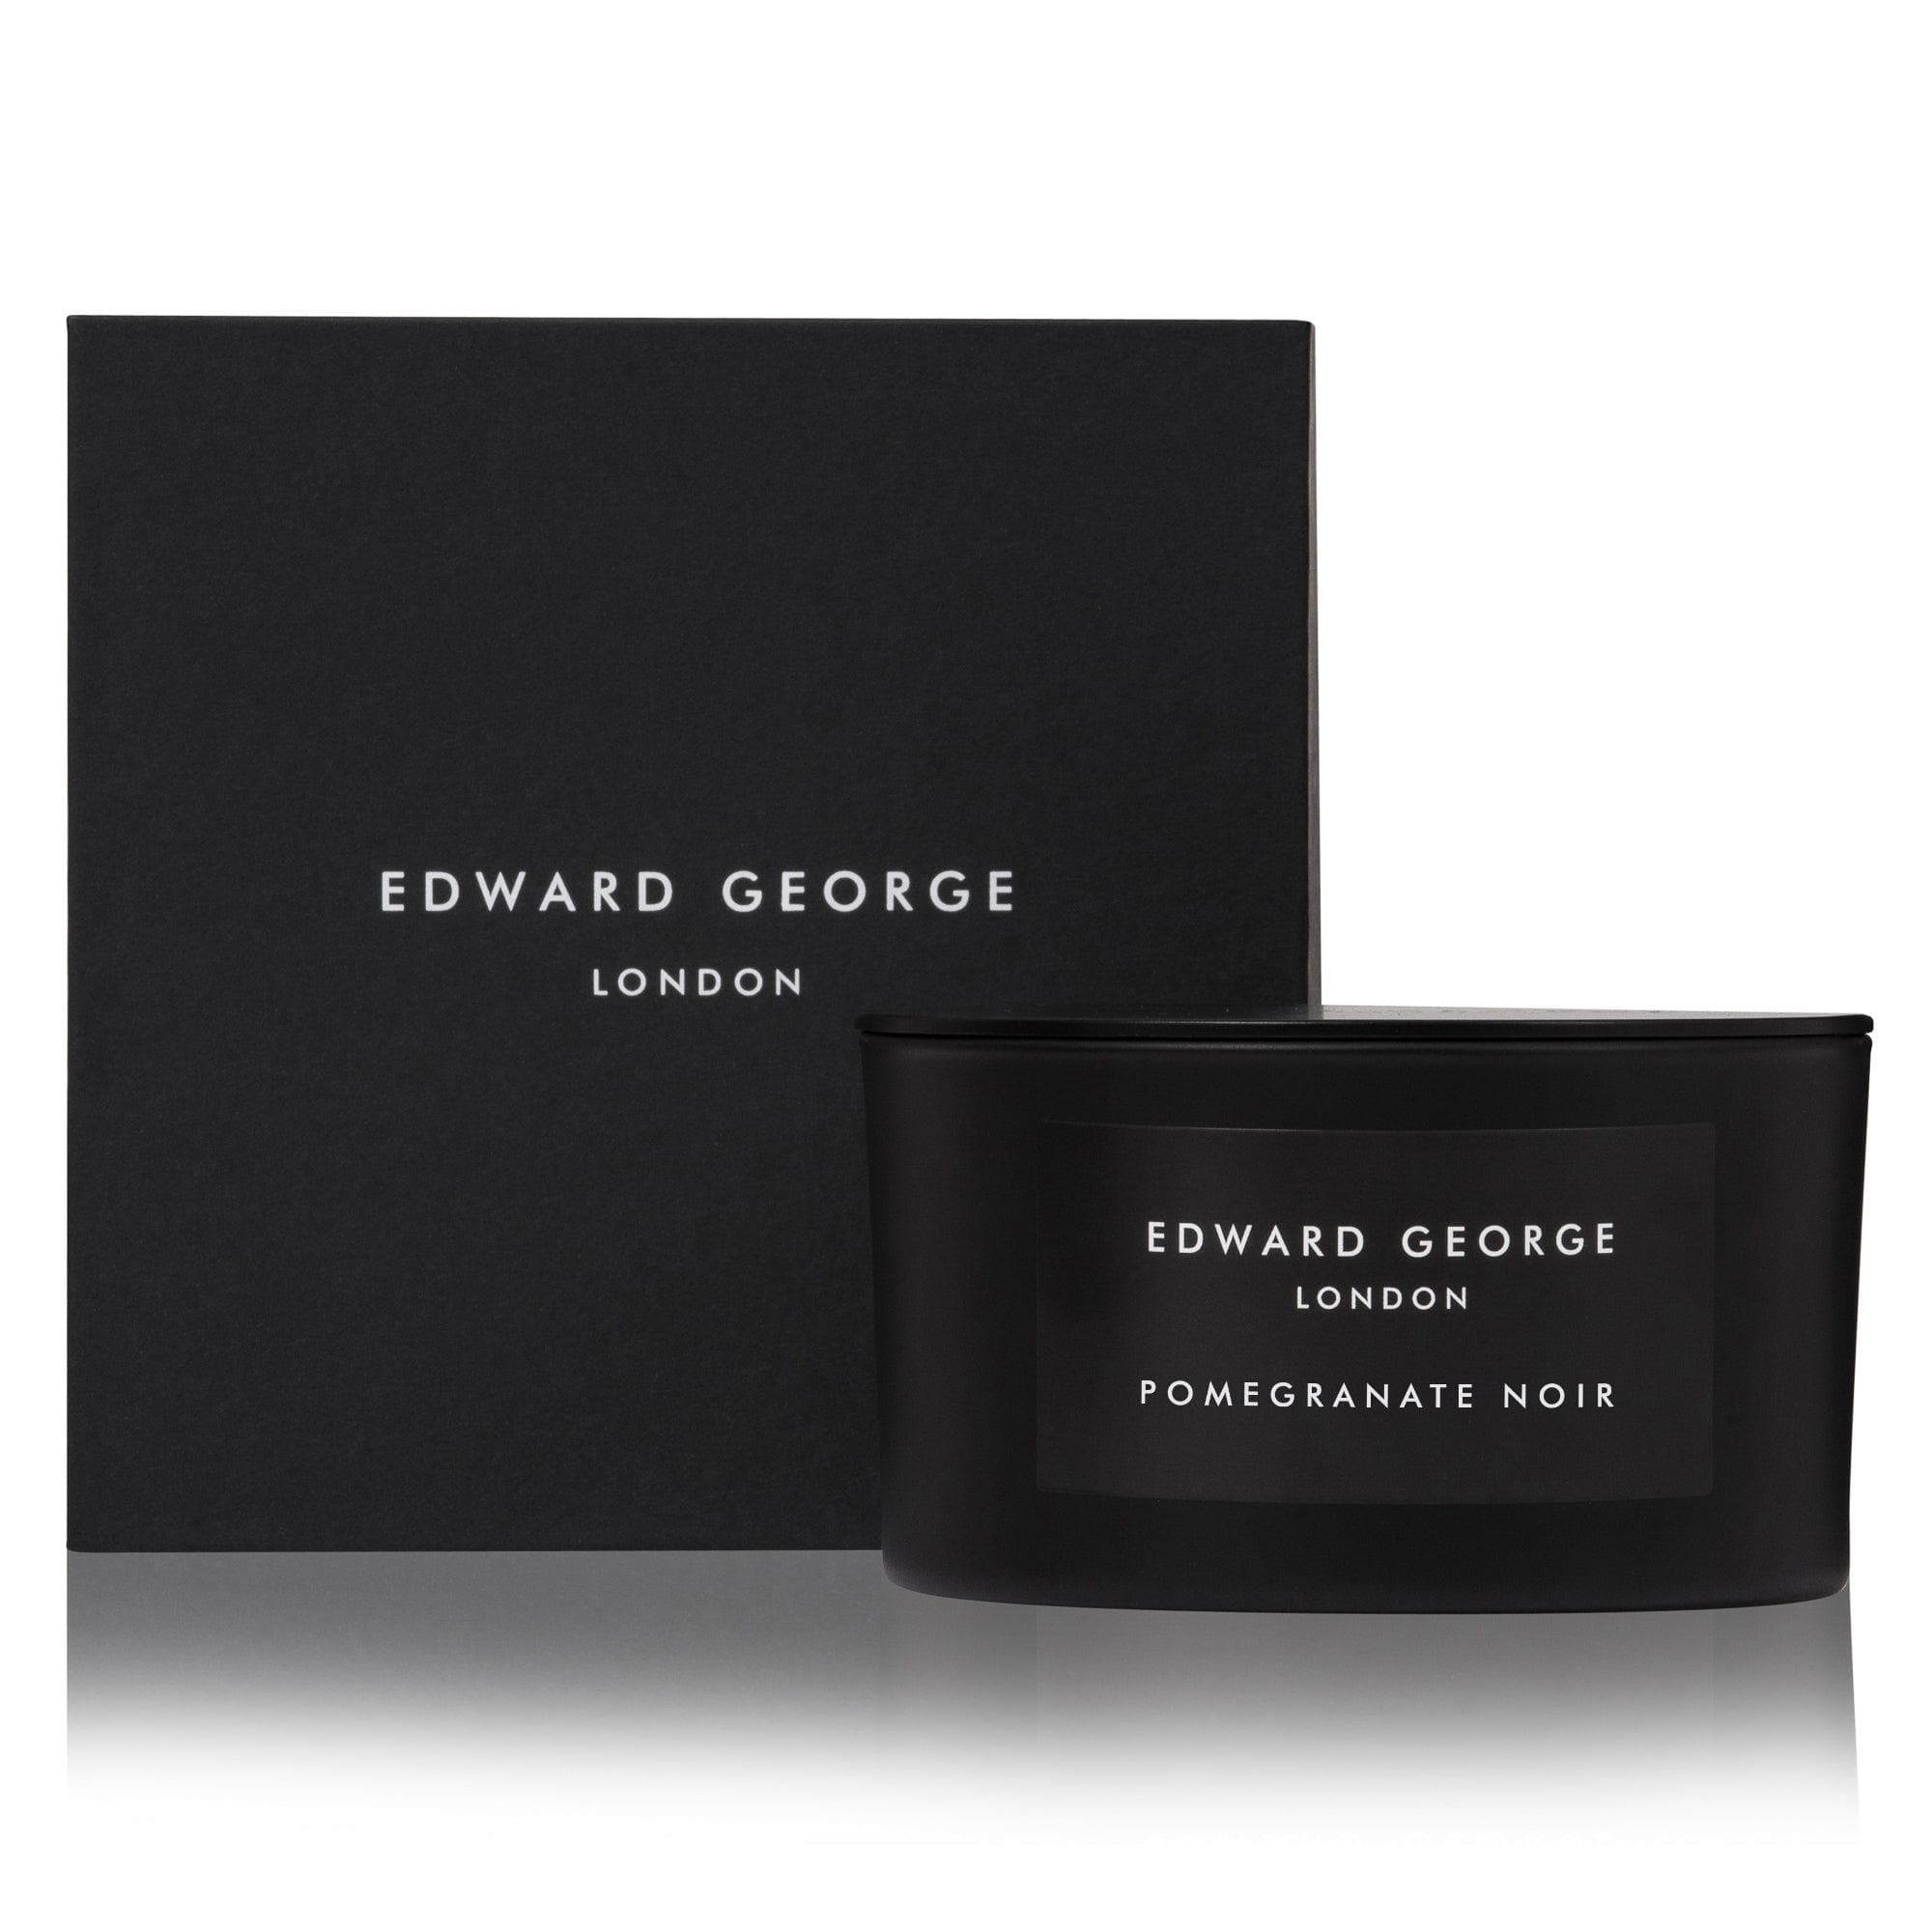 pomegranate noir candles home fragrance decor room living edward george london luxury gift ritual scent set lid black wax best wax scented candle women men large